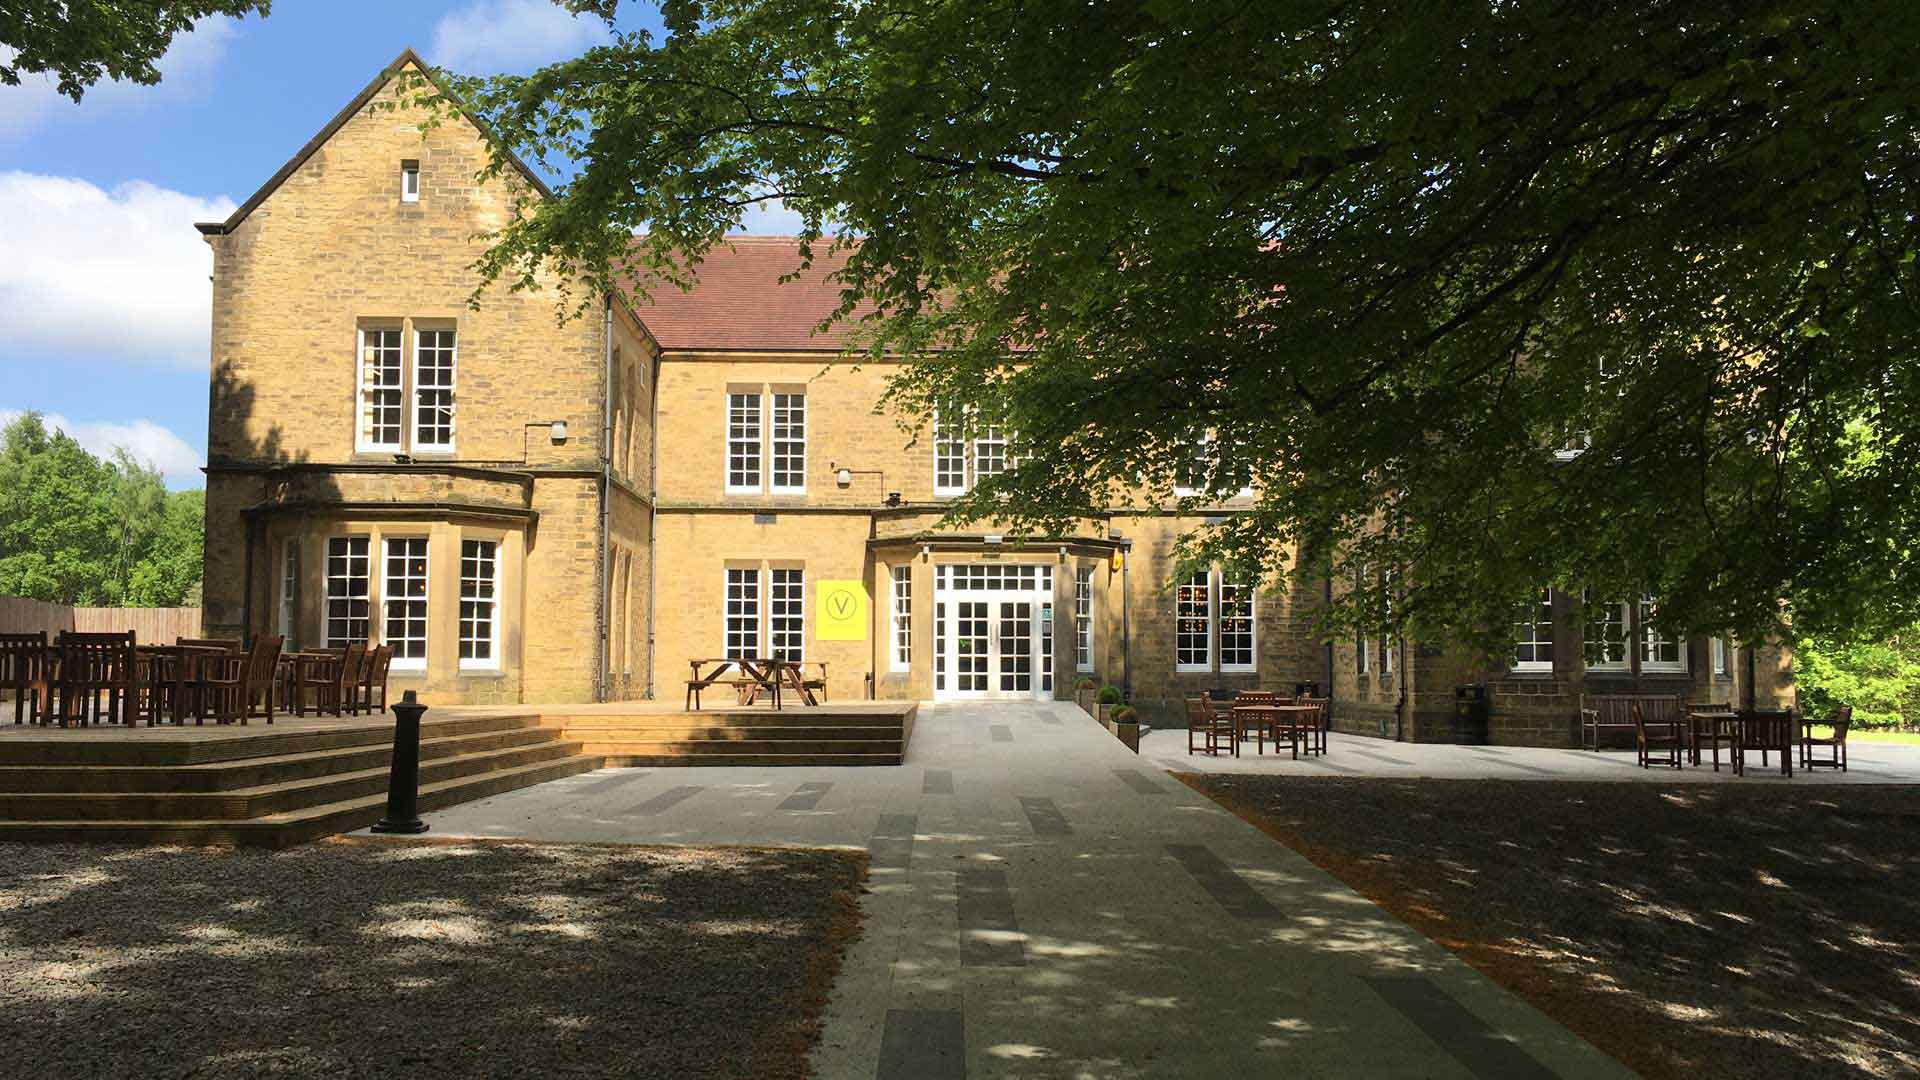 A photograph of the entrance to the Storthes Hall Park building